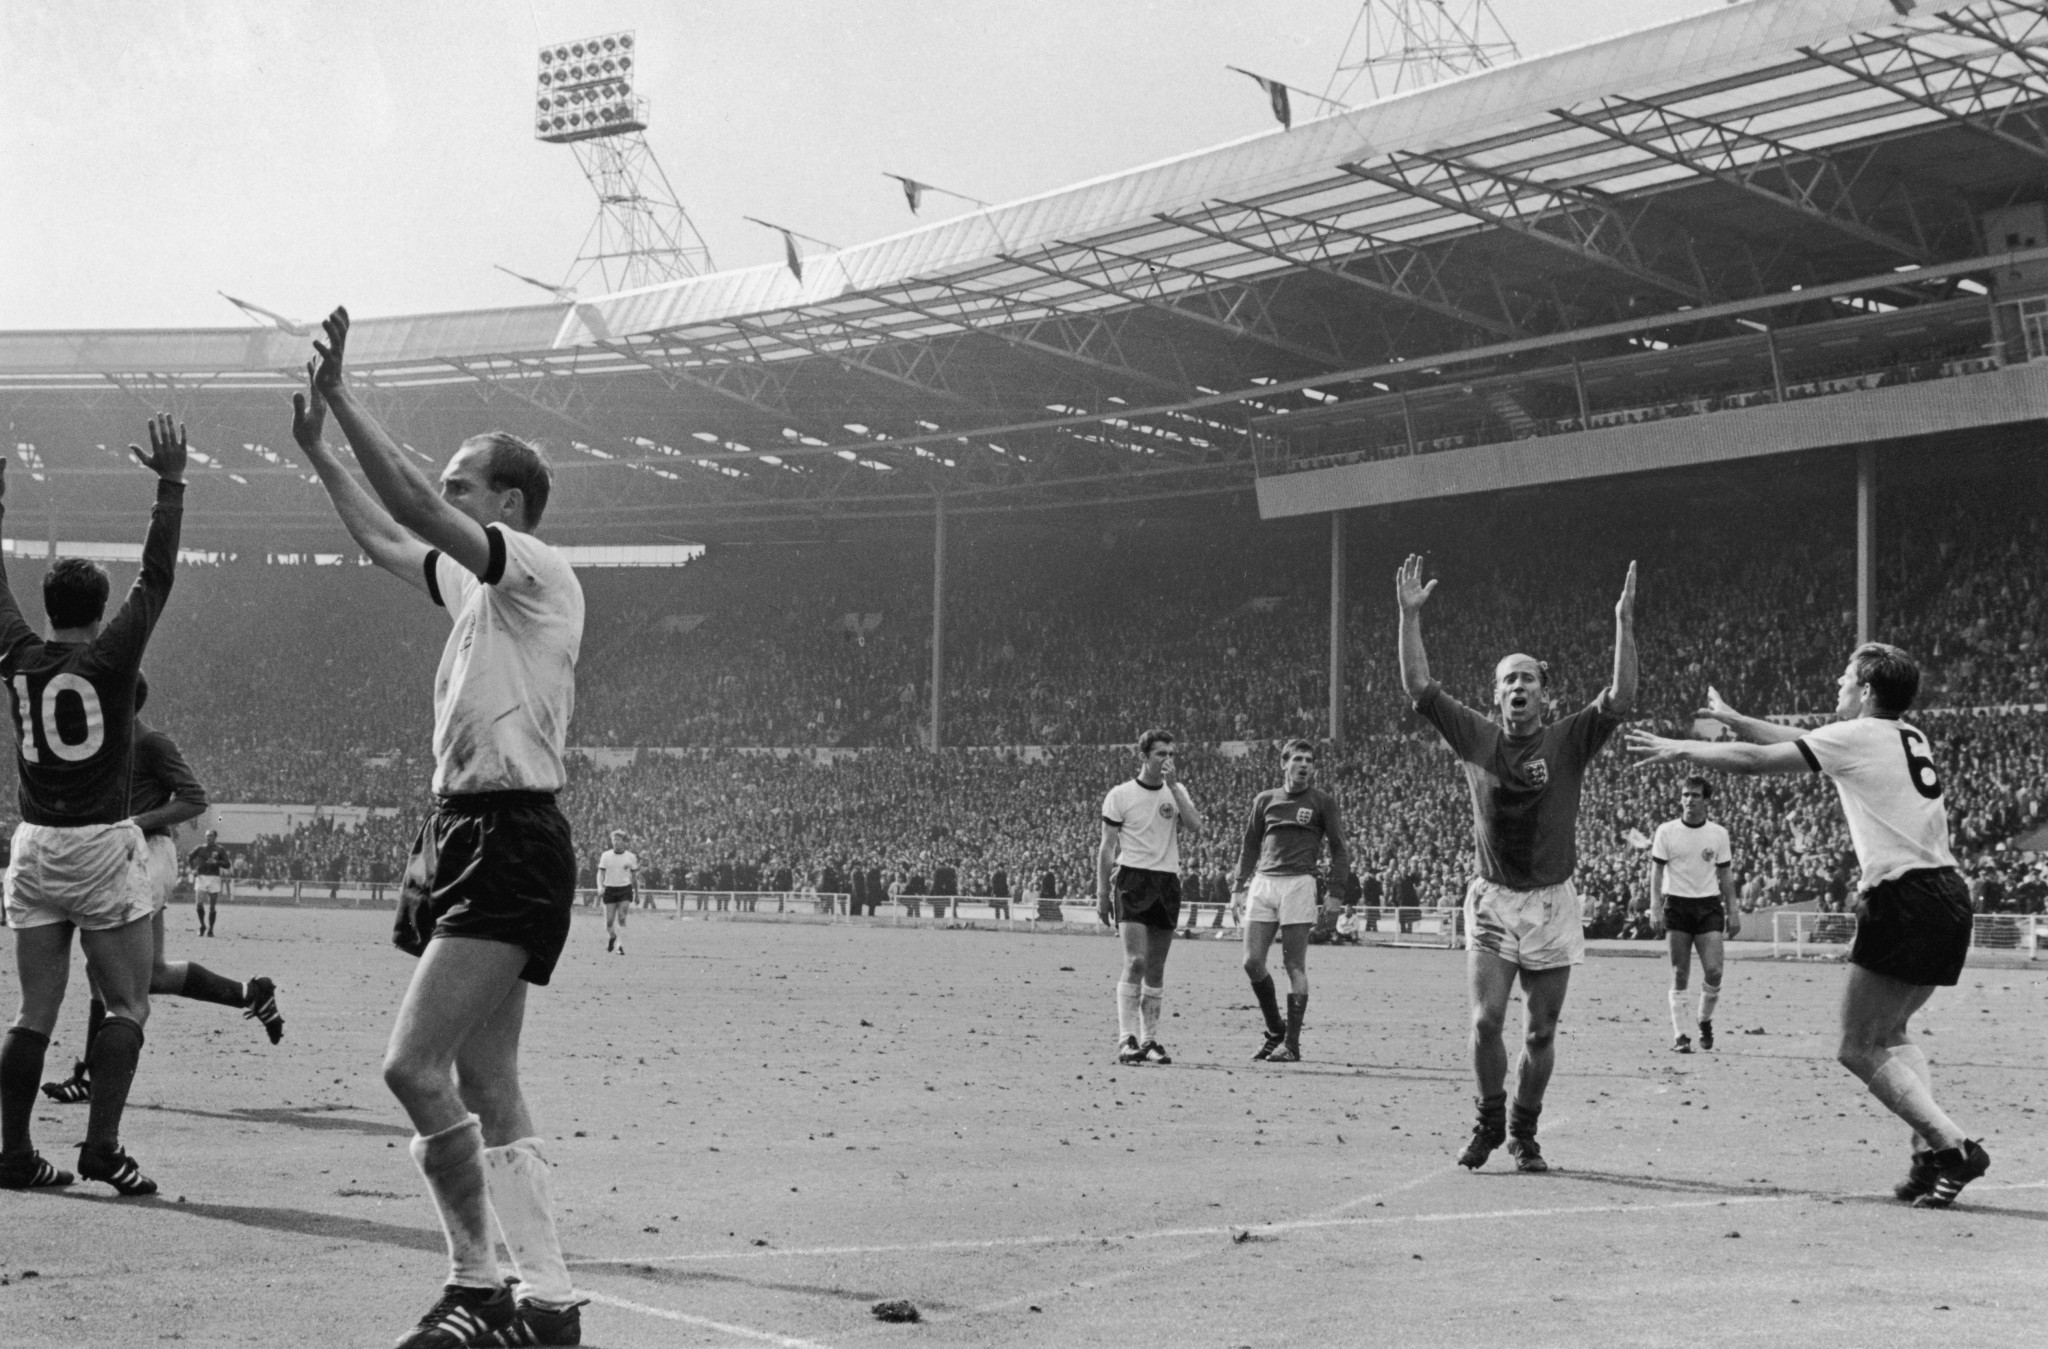 Bobby Charlton remained convinced that England's third goal scored by Geoff Hurst, number 10, in the 1966 World Cup final did cross the line ©Getty Images